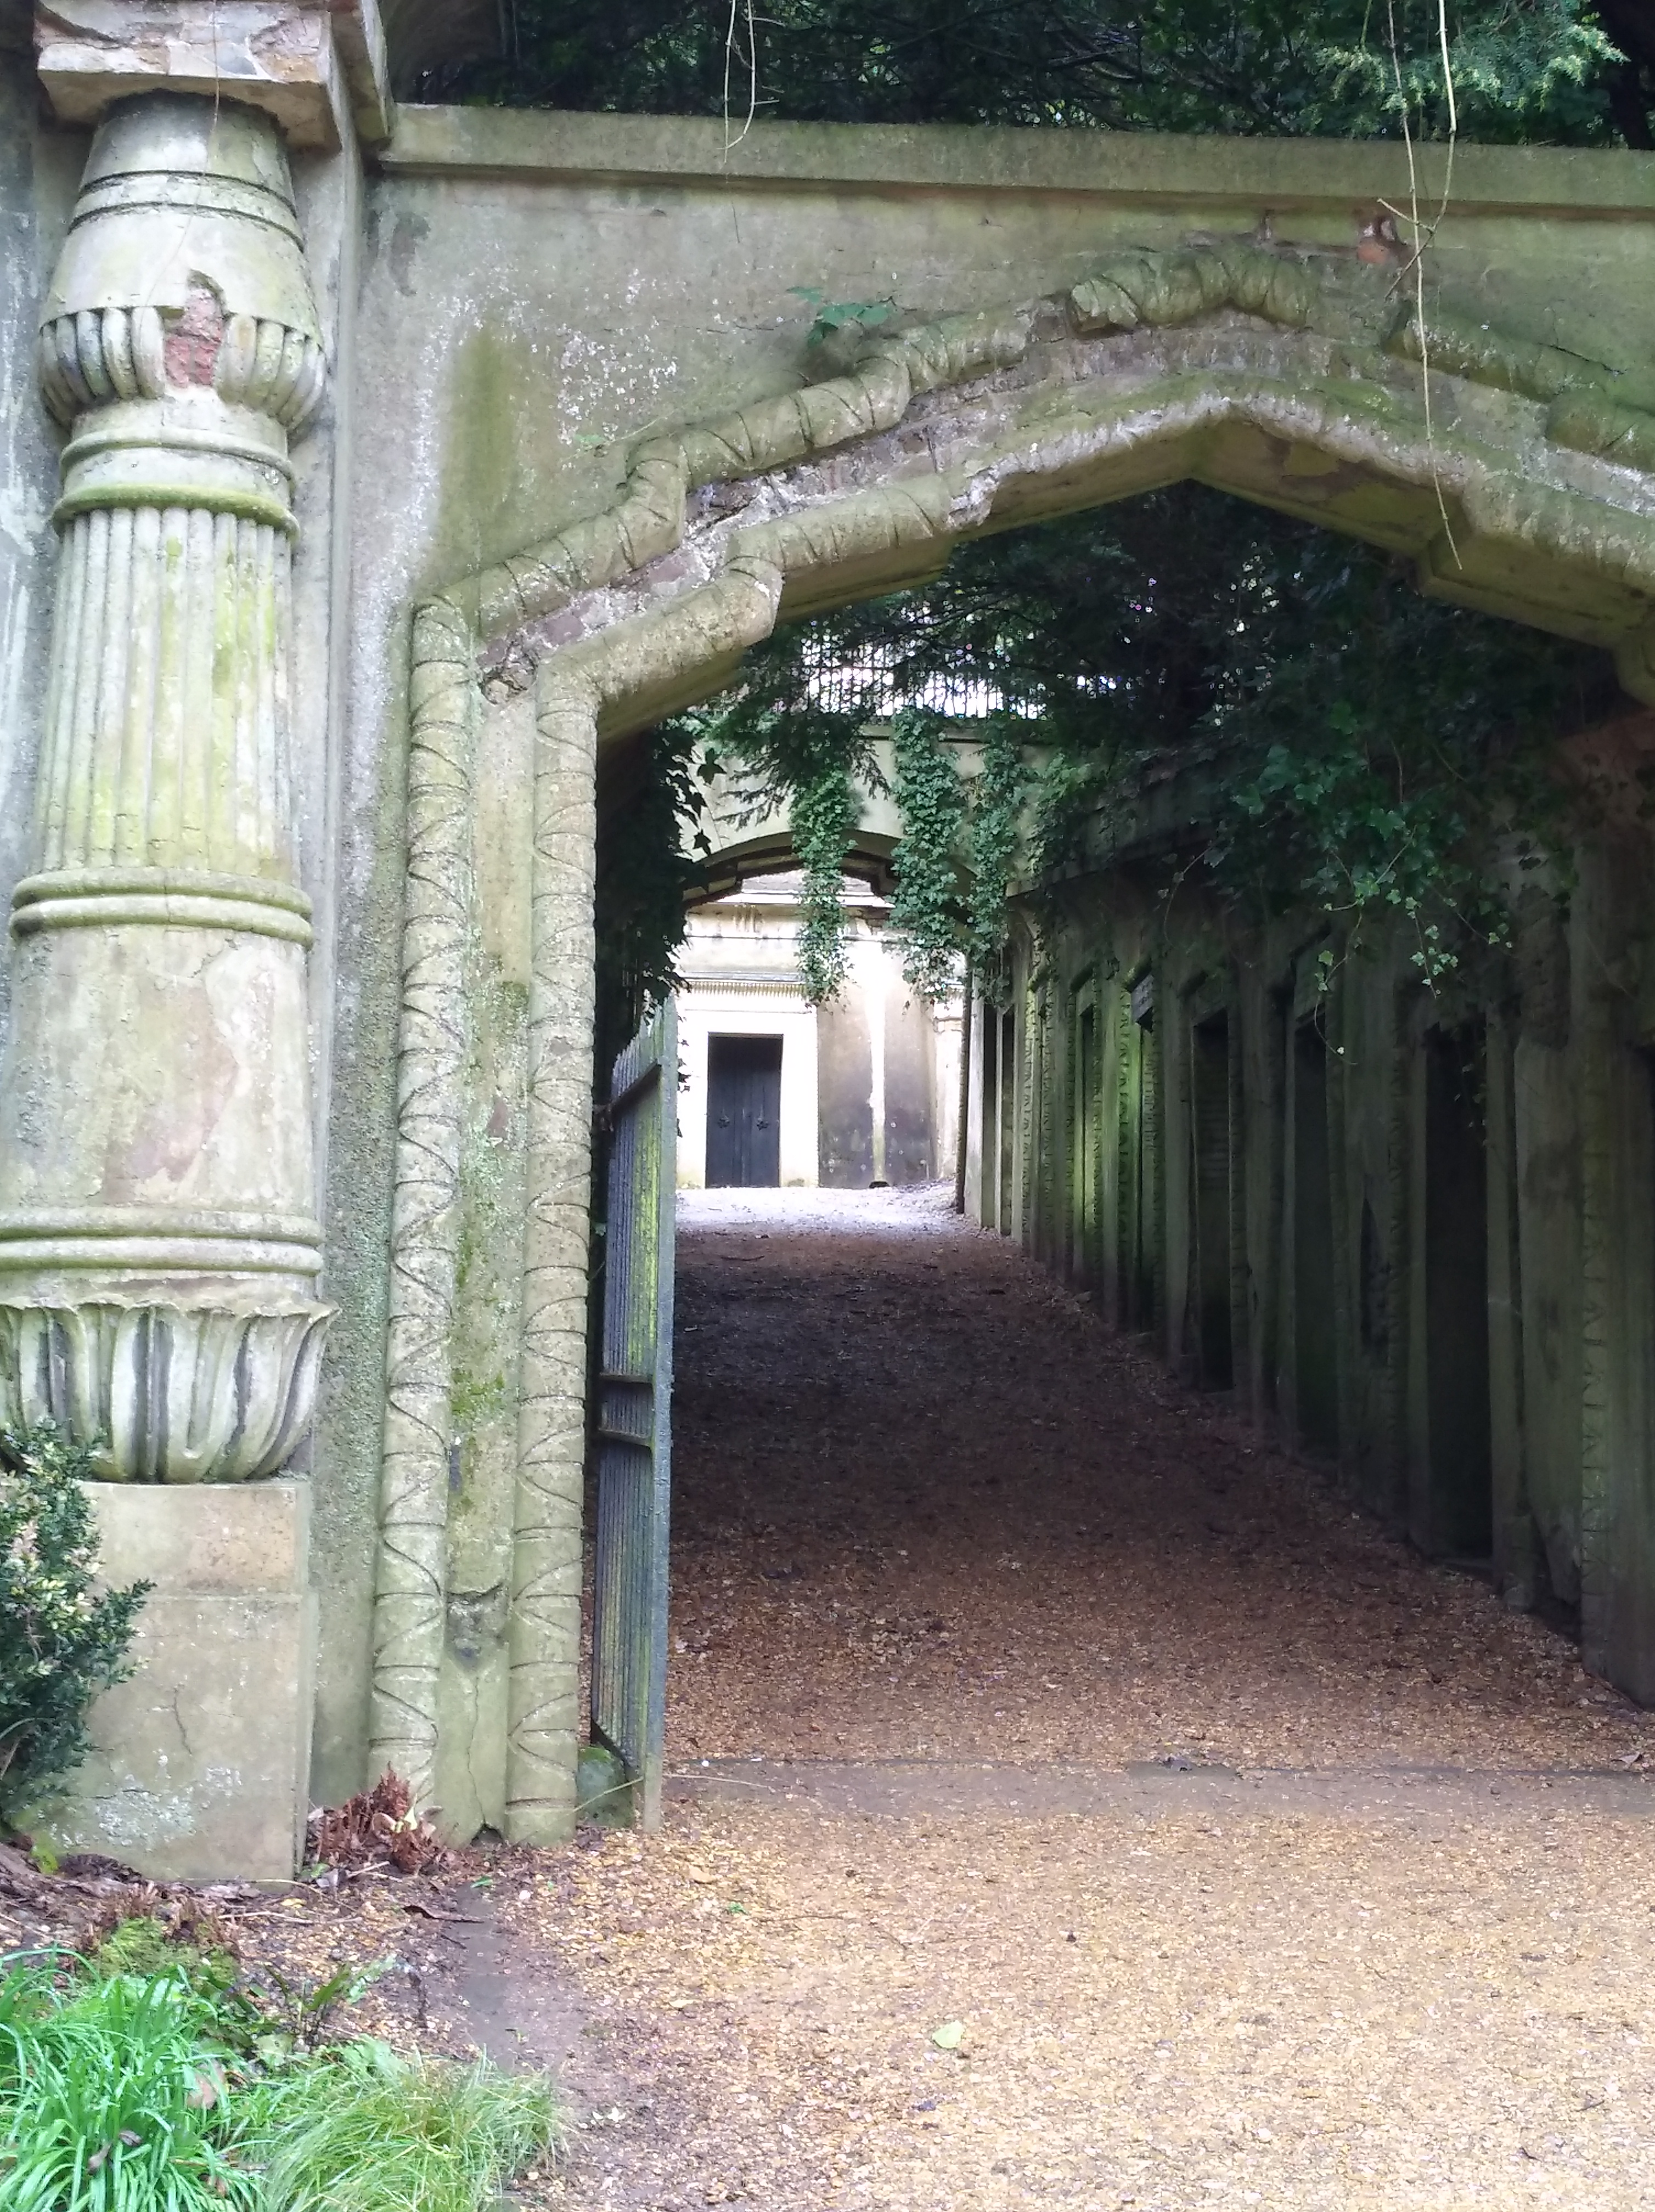 Image of the Egyptian Avenue, Highgate Cemetery, West